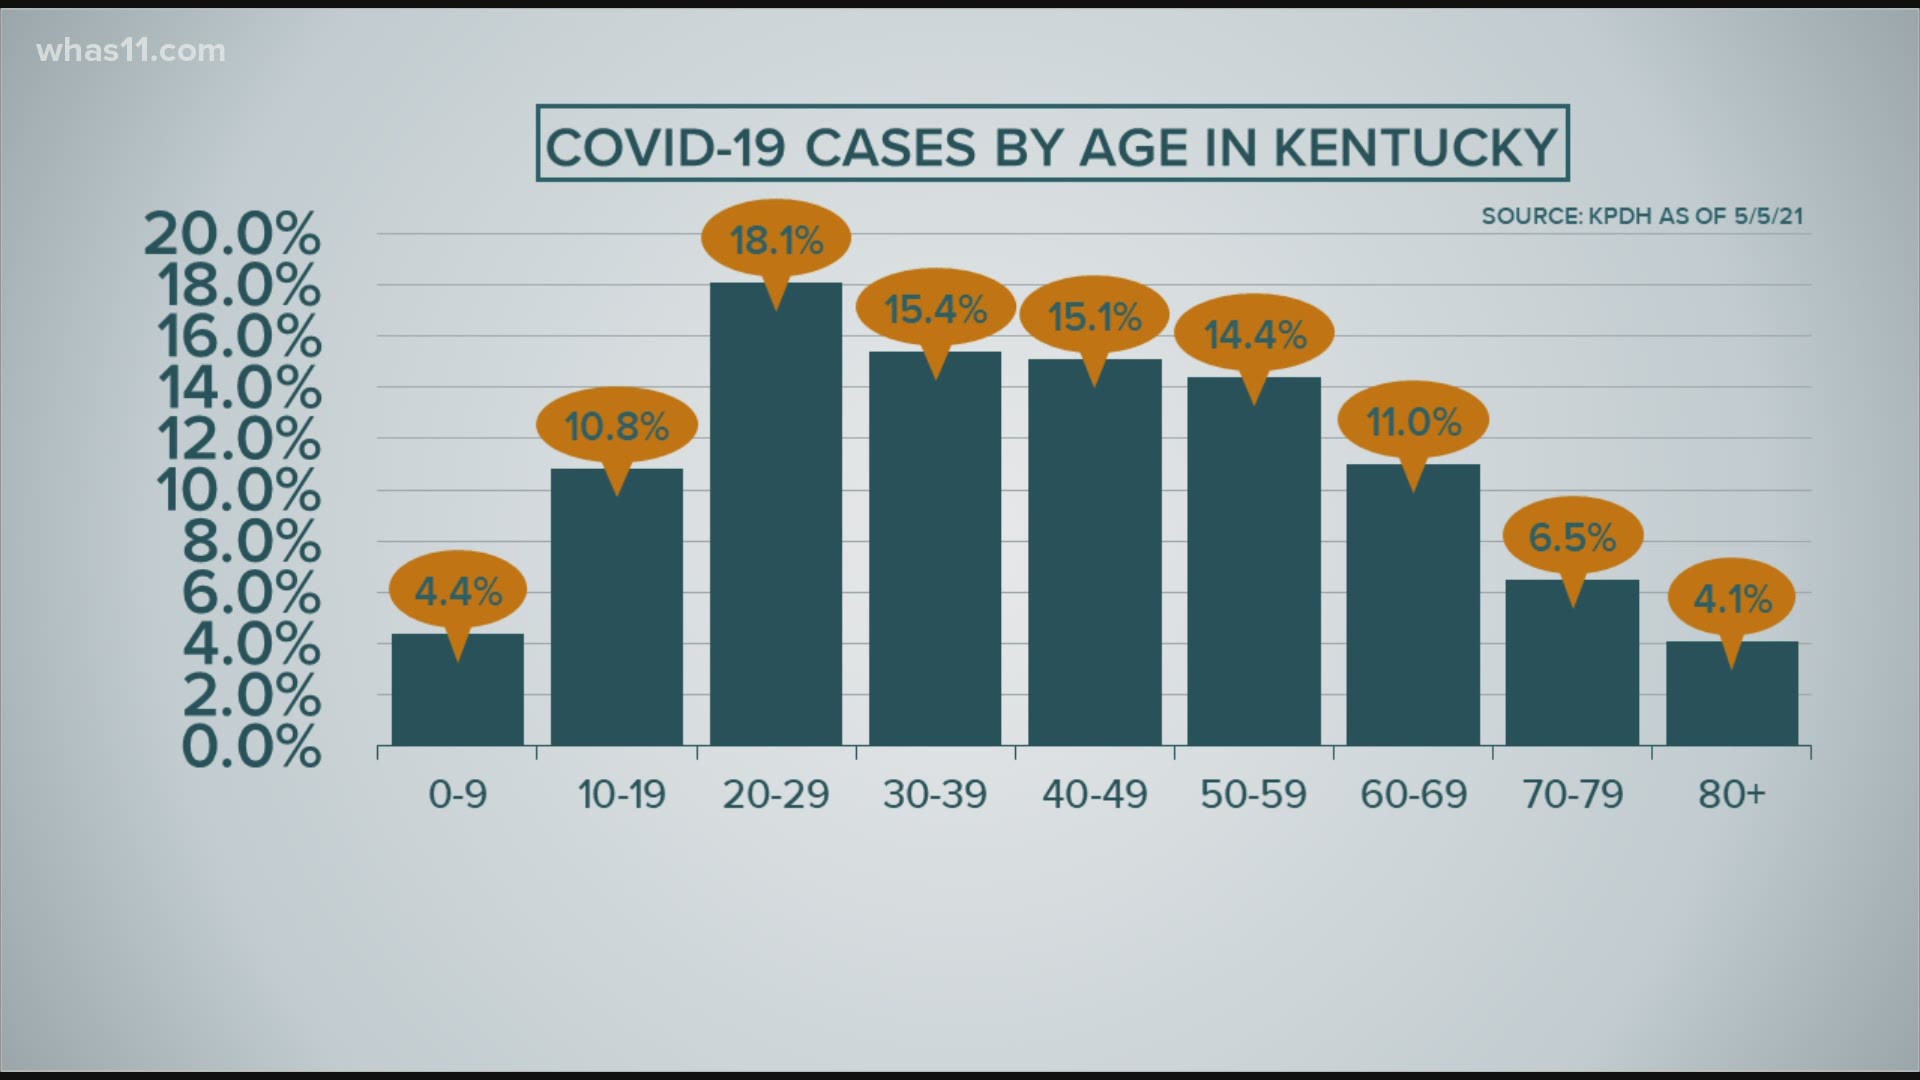 We're breaking down the data on COVID-19 cases by age to see what trends appear in Kentucky and Indiana.